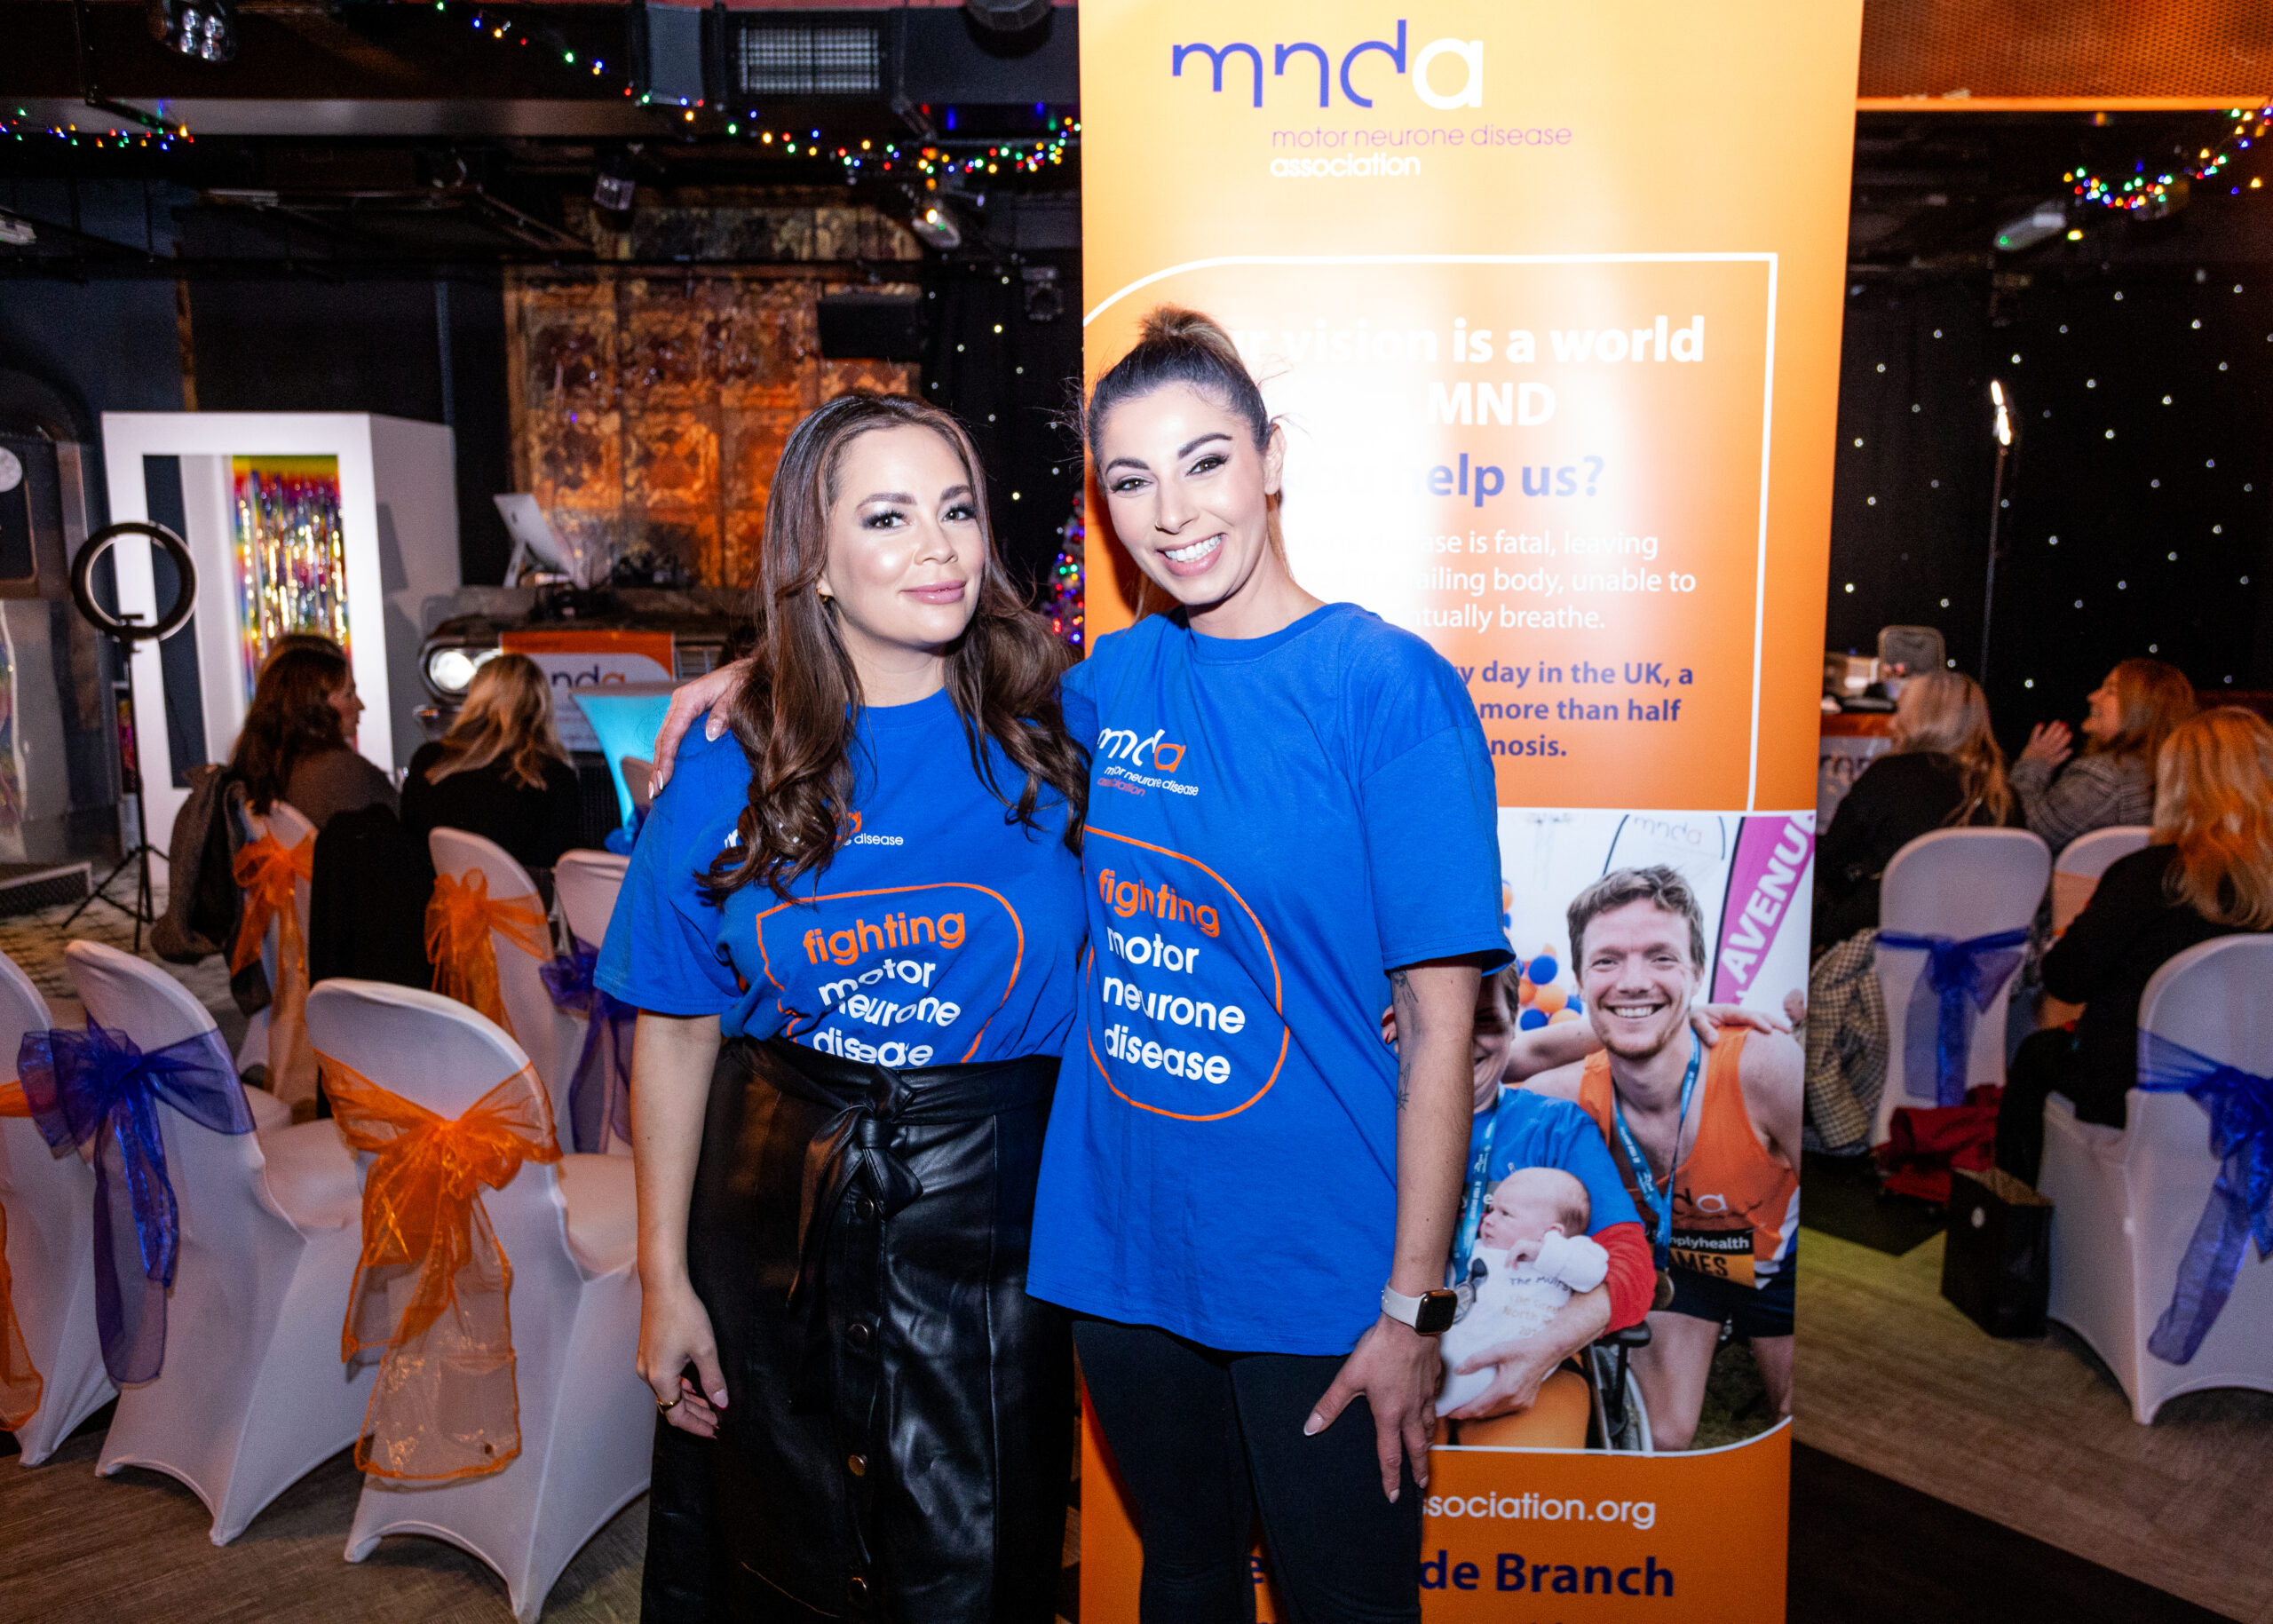 Over £1,100 was raised for the Merseyside MND Association through a Christmas Makeup Masterclass Fundraiser organised by Rosie Cleave and Amanda Borg at The Southport Coaster pub in Southport. Rosie Cleave (left) anmd Amanda Borg (right). Photo by Banak Photography 